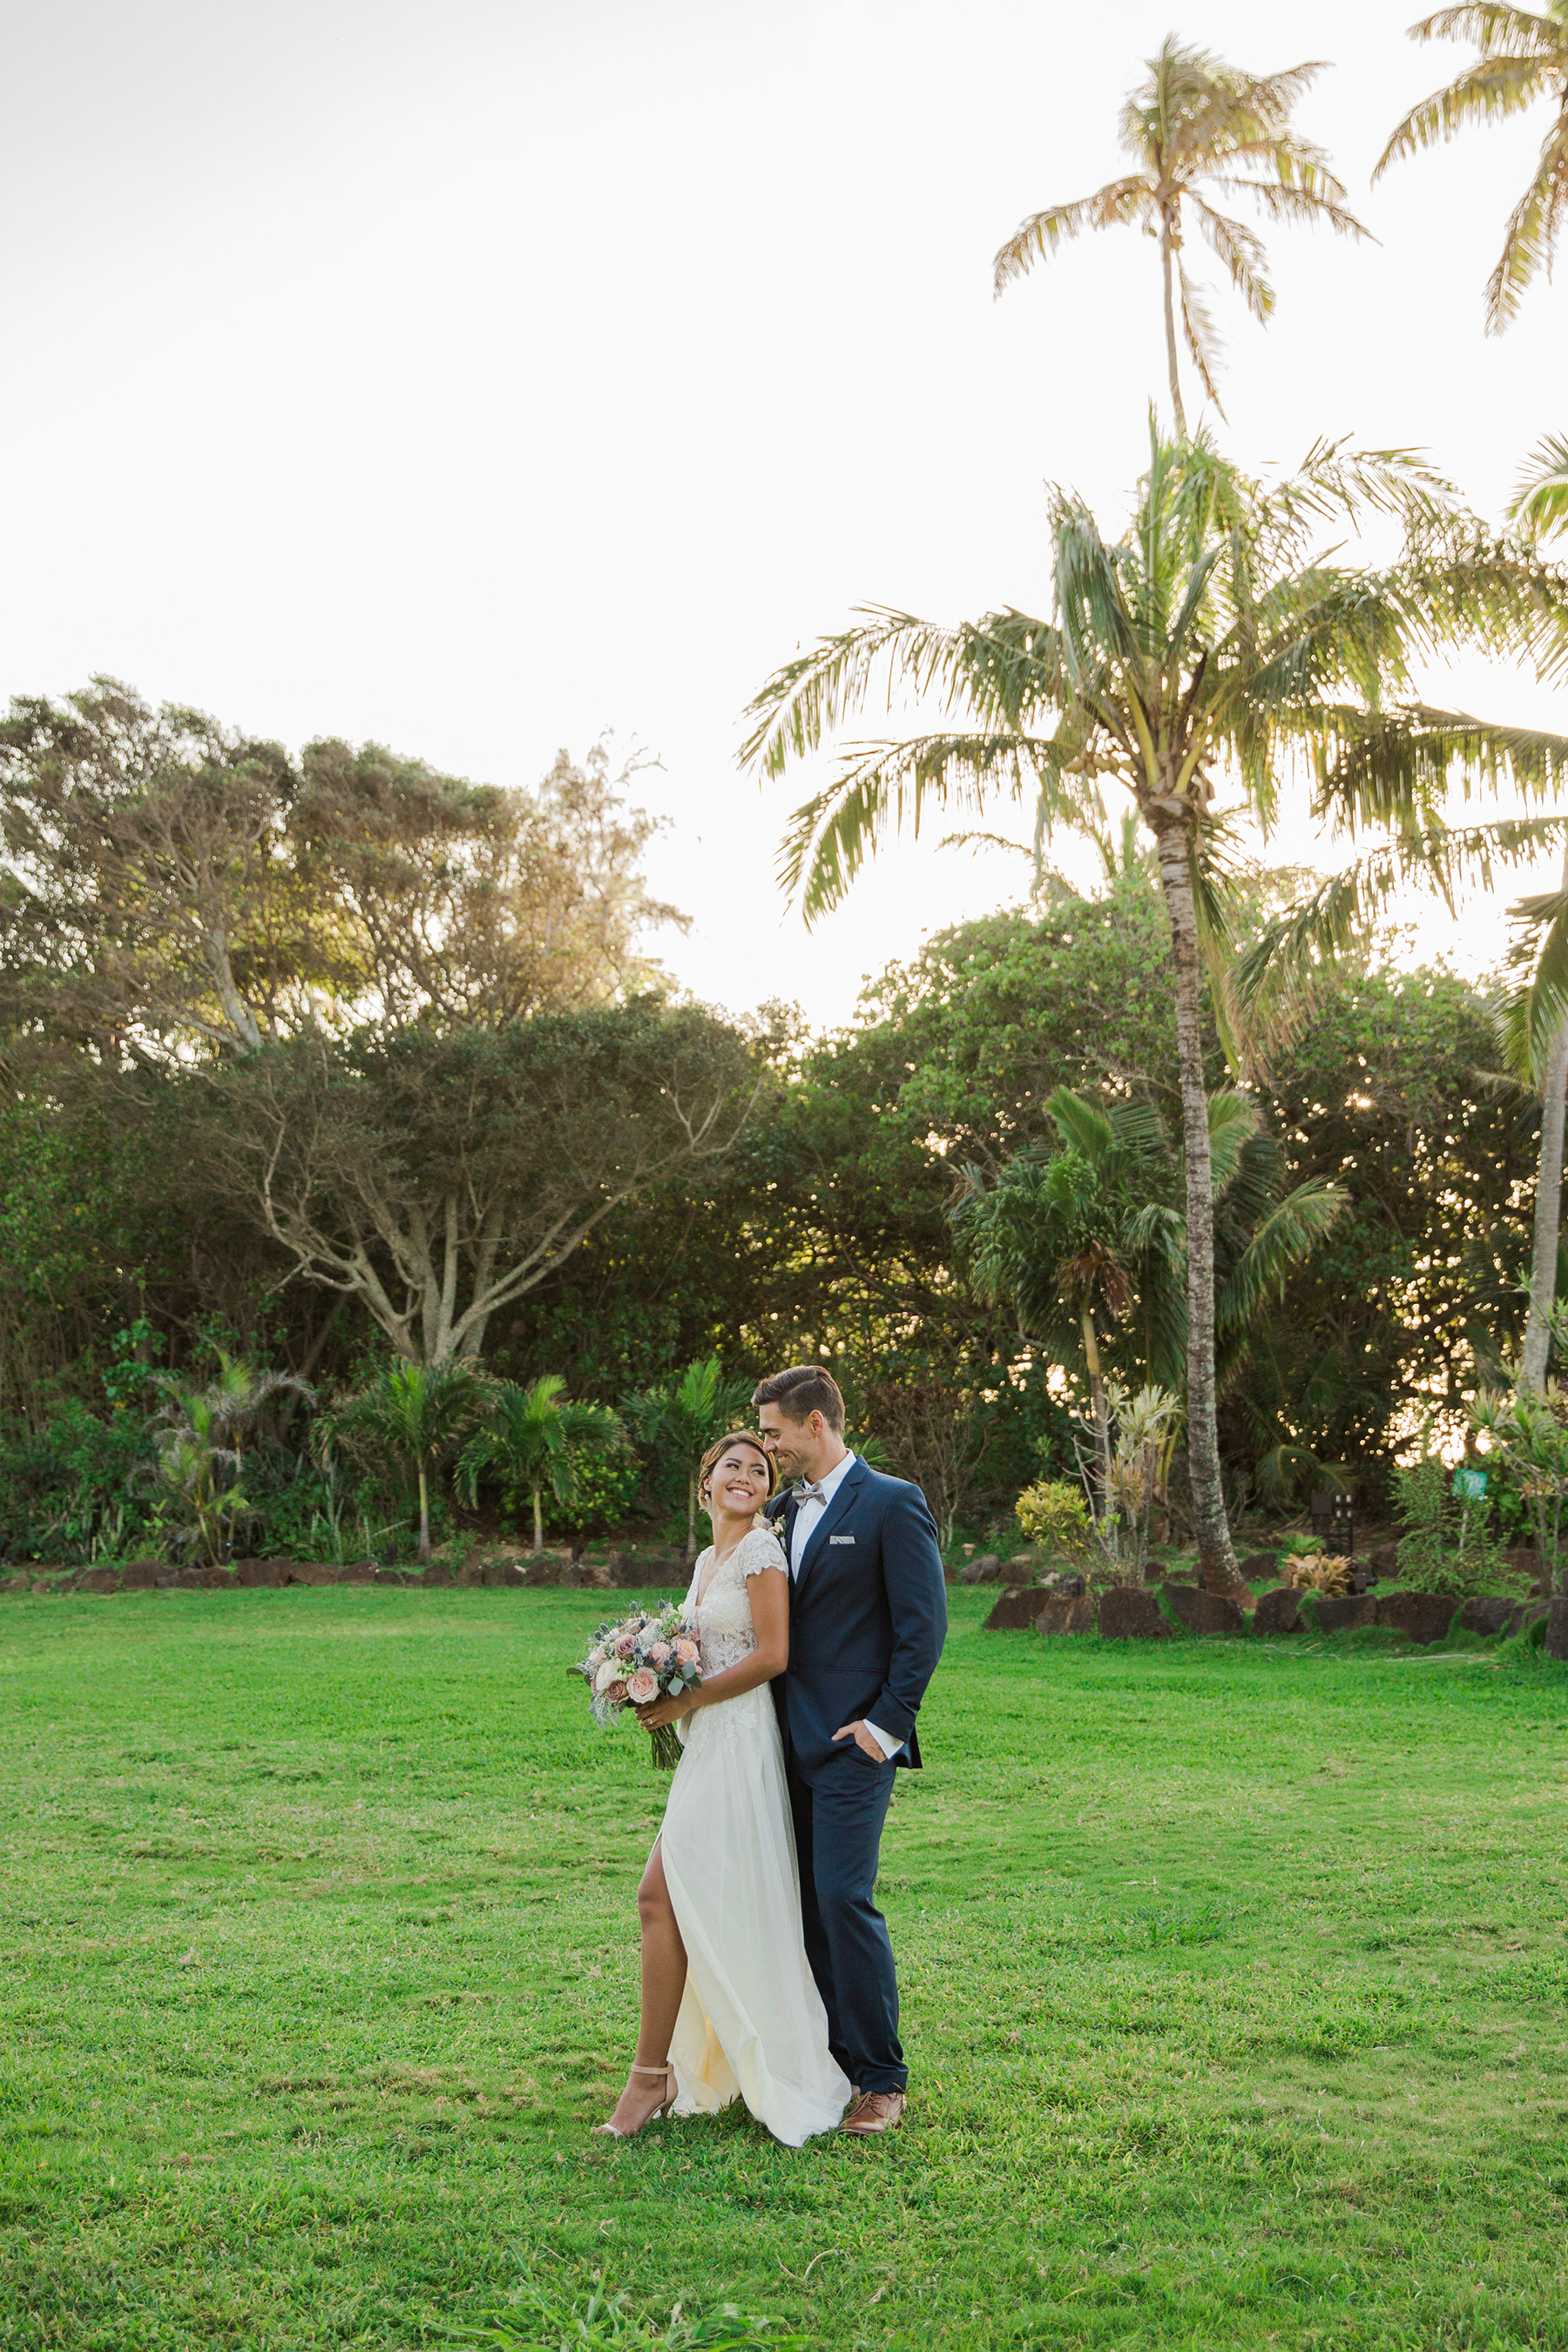 Whimsical and Modern Wedding Inspiration on Hawaii’s North Shore